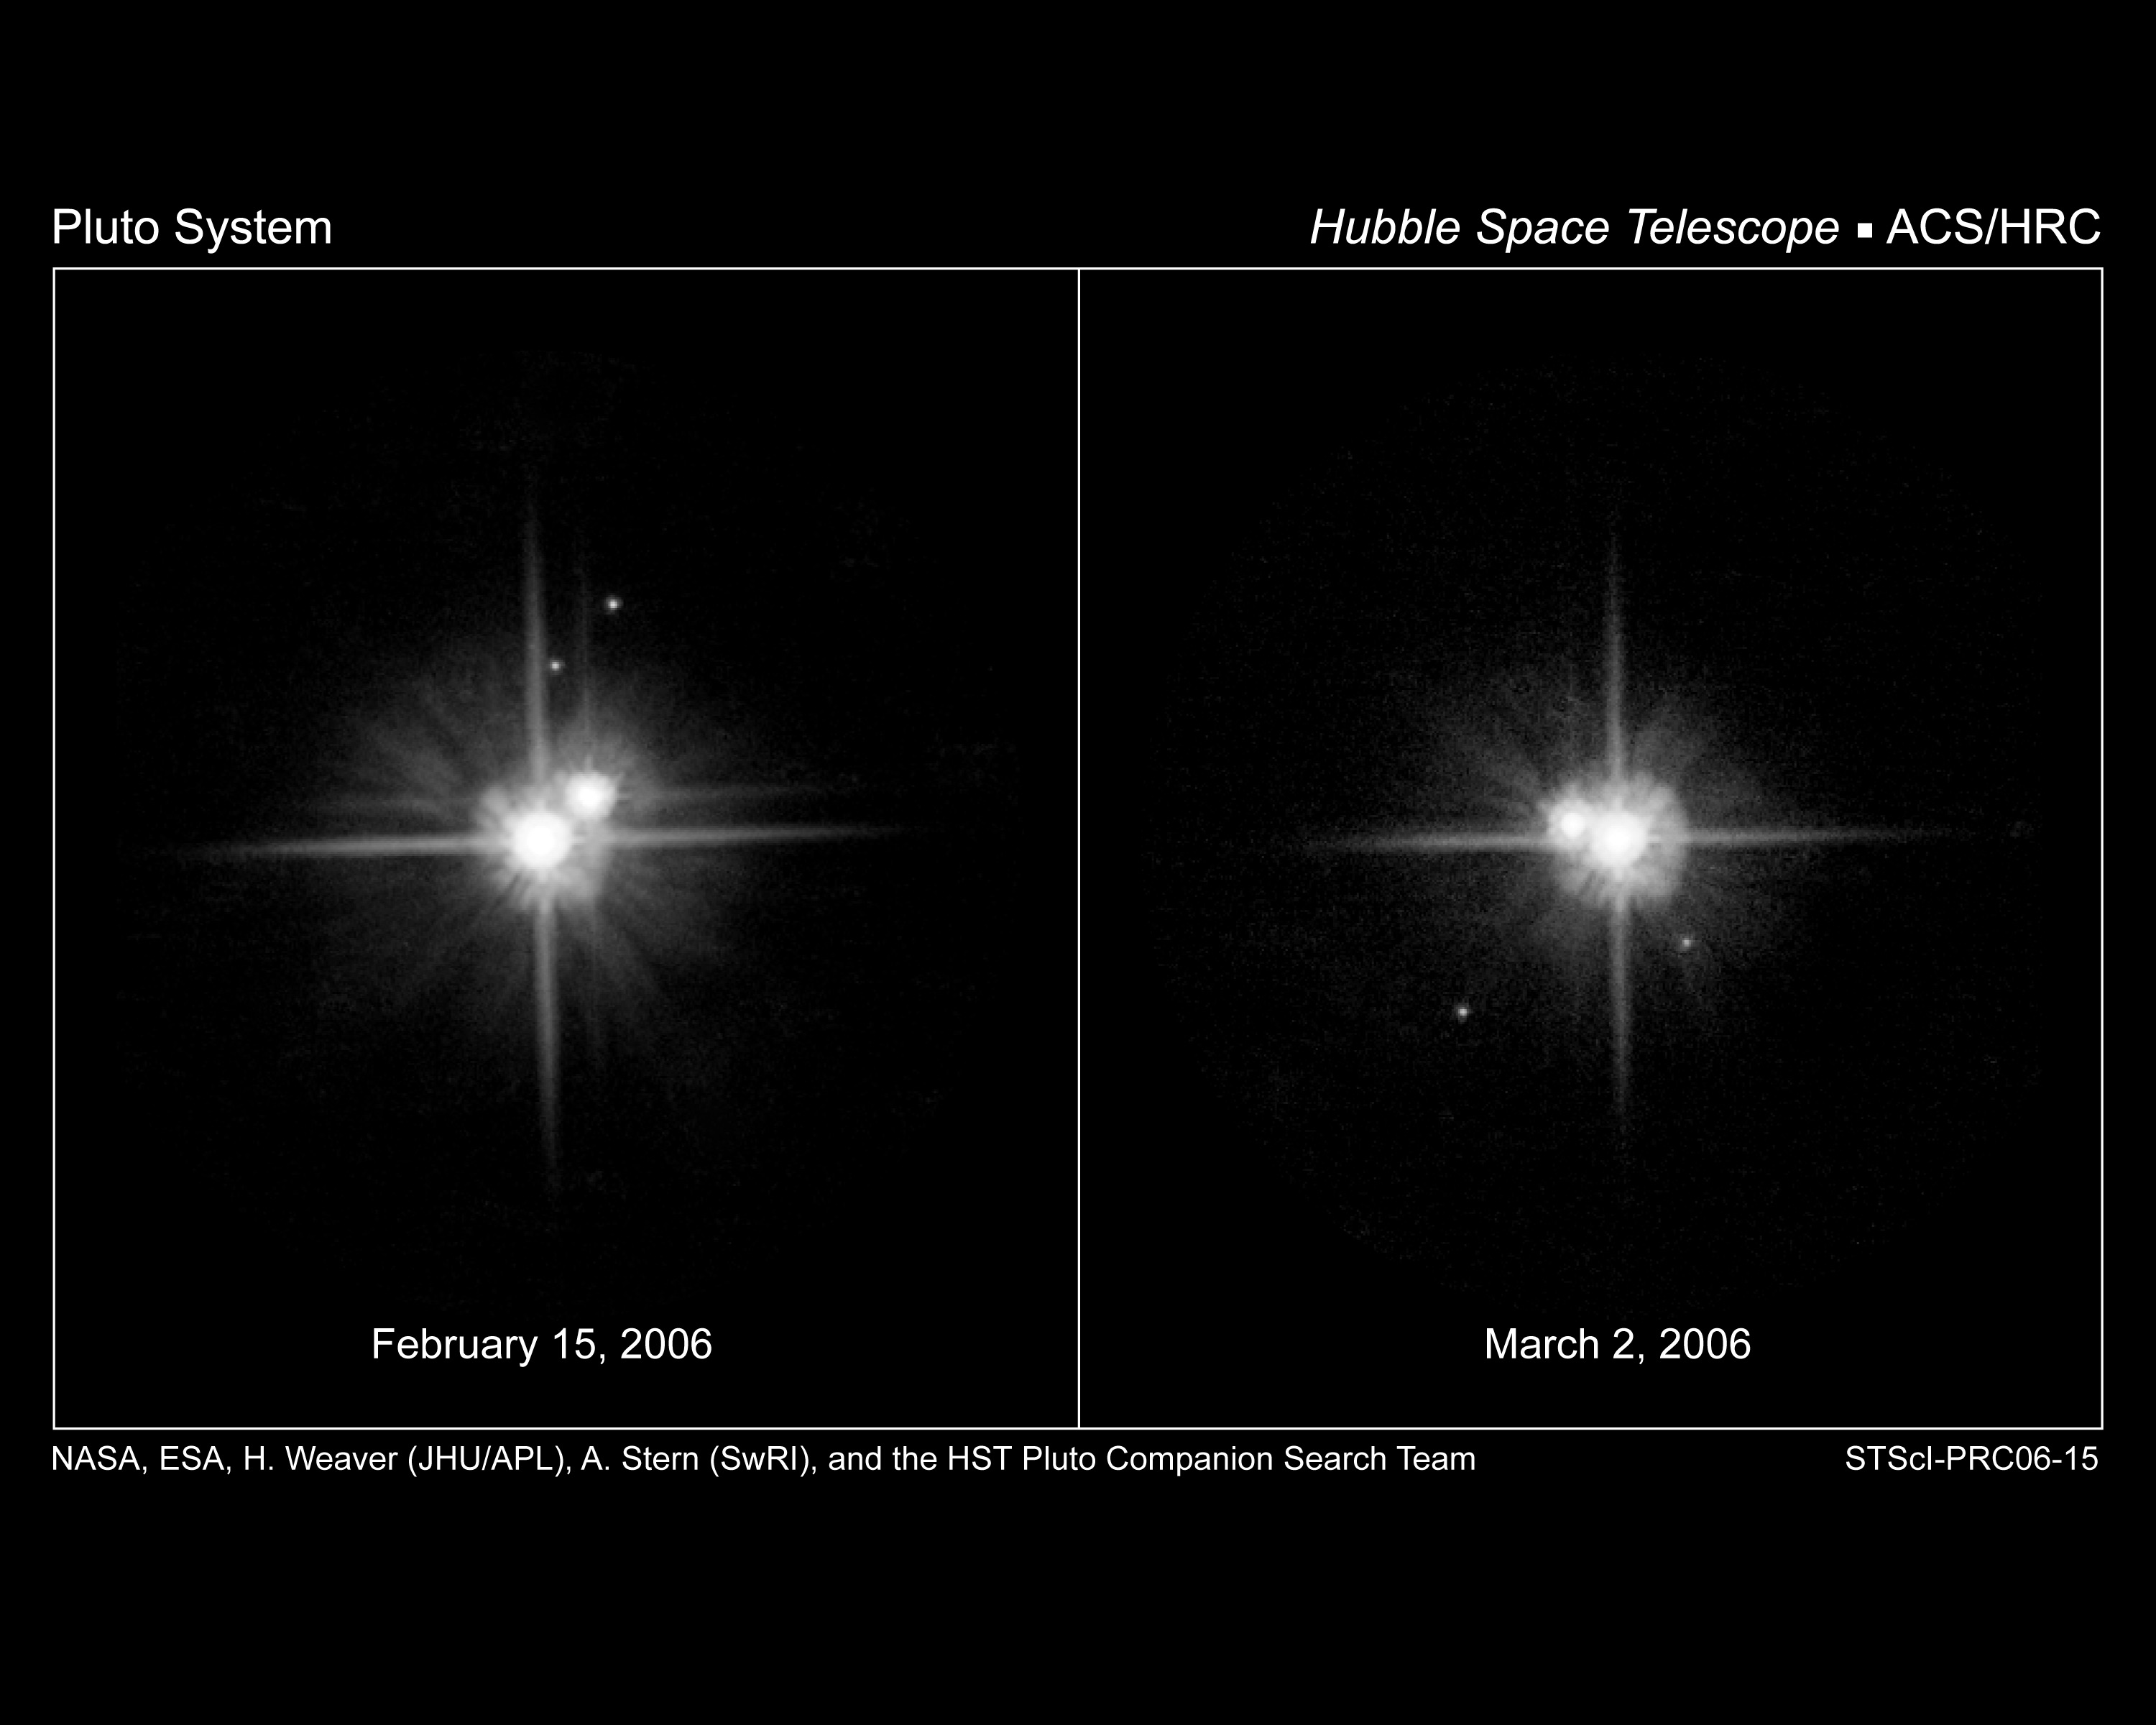 This pair of NASA Hubble Space Telescope images shows the motion of Pluto's satellites between February 15th and March 2nd, 2006. Both images were taken through a red filter (F606W) using the High Resolution Channel (HRC) of the Advanced Camera for Surveys (ACS)